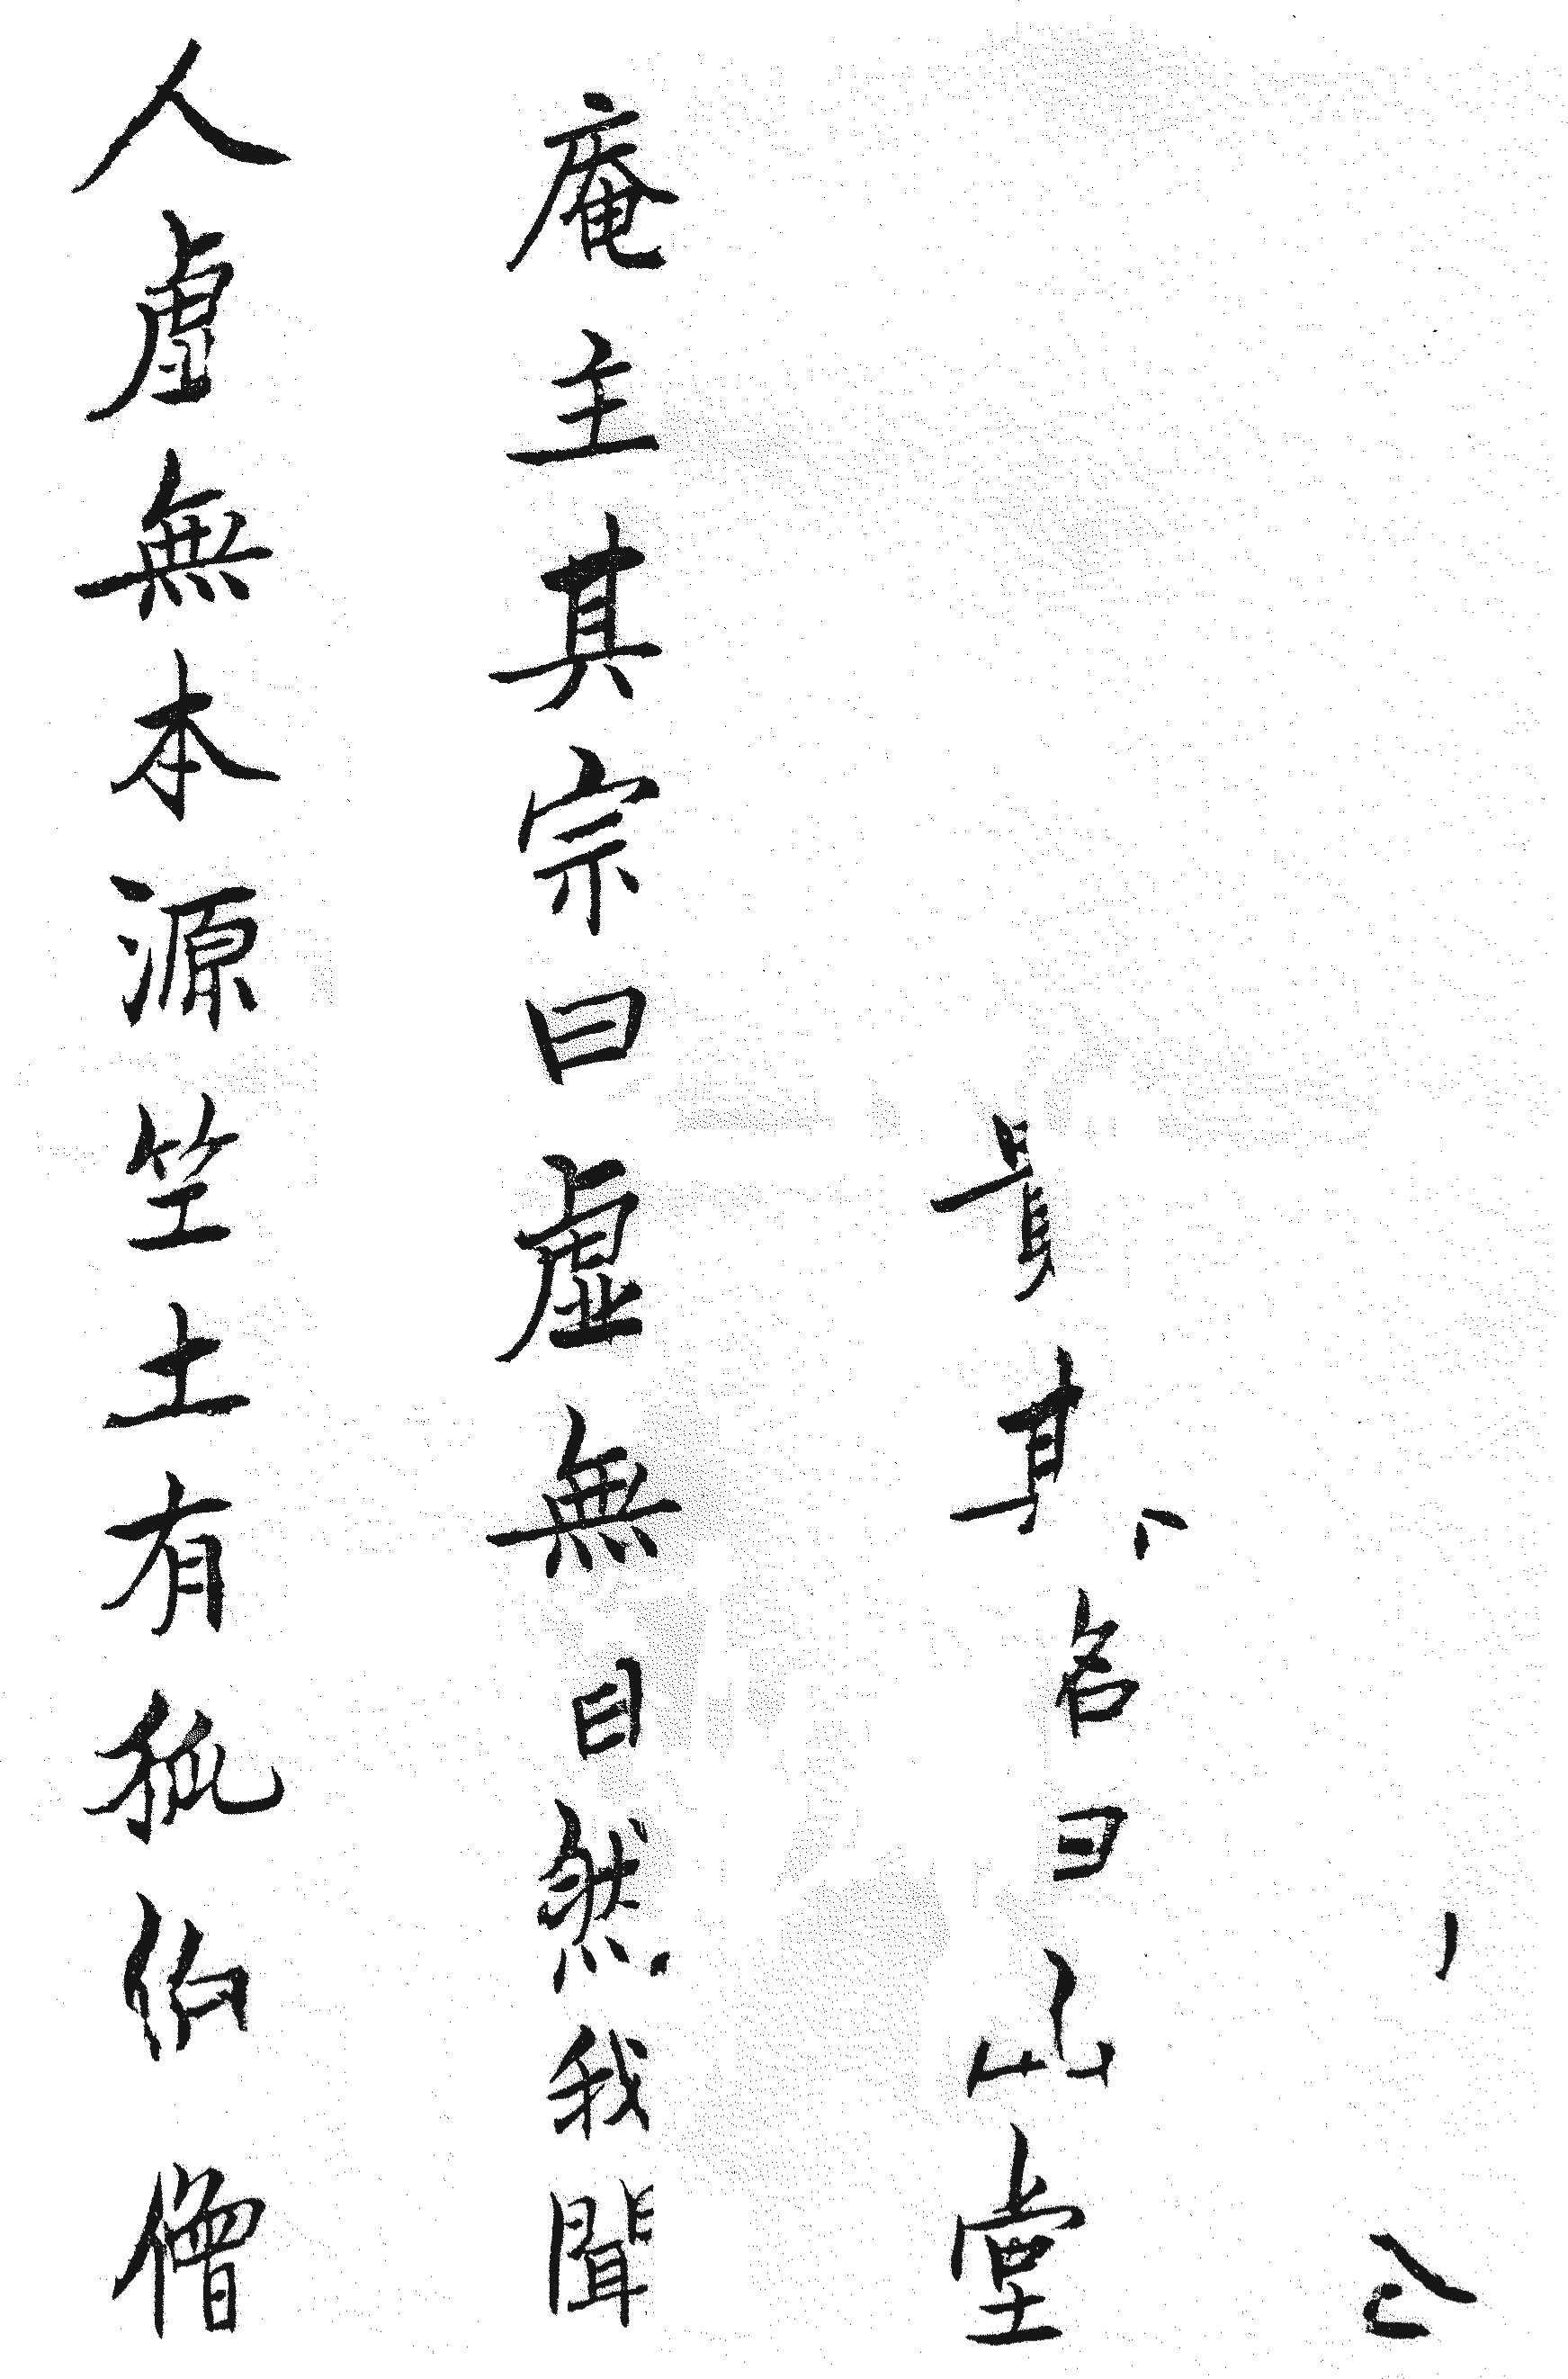 Isshi Bunshu's letter first section